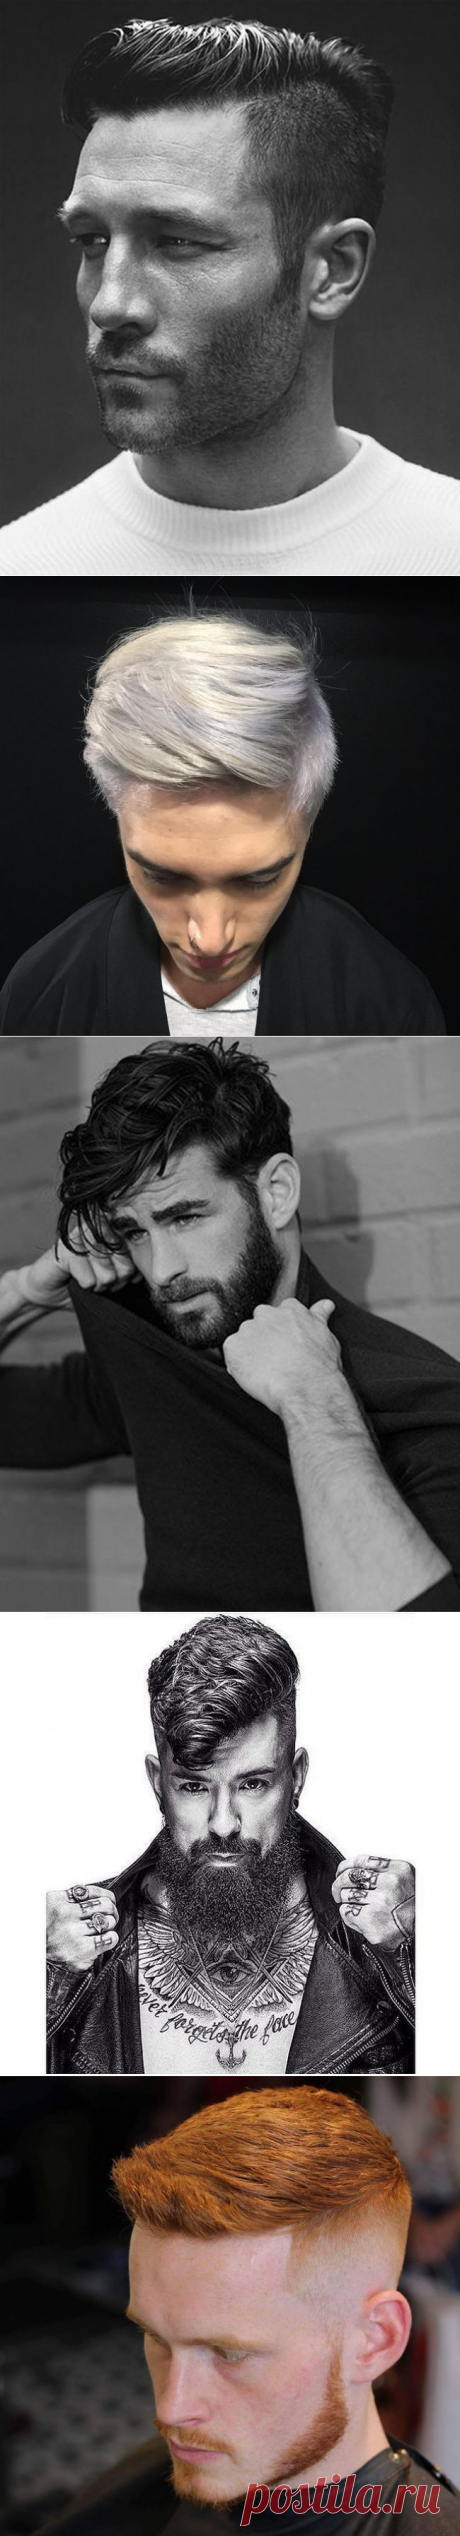 30 Marvelous Men's Side Swept Hairstyles - Neat and Sexy